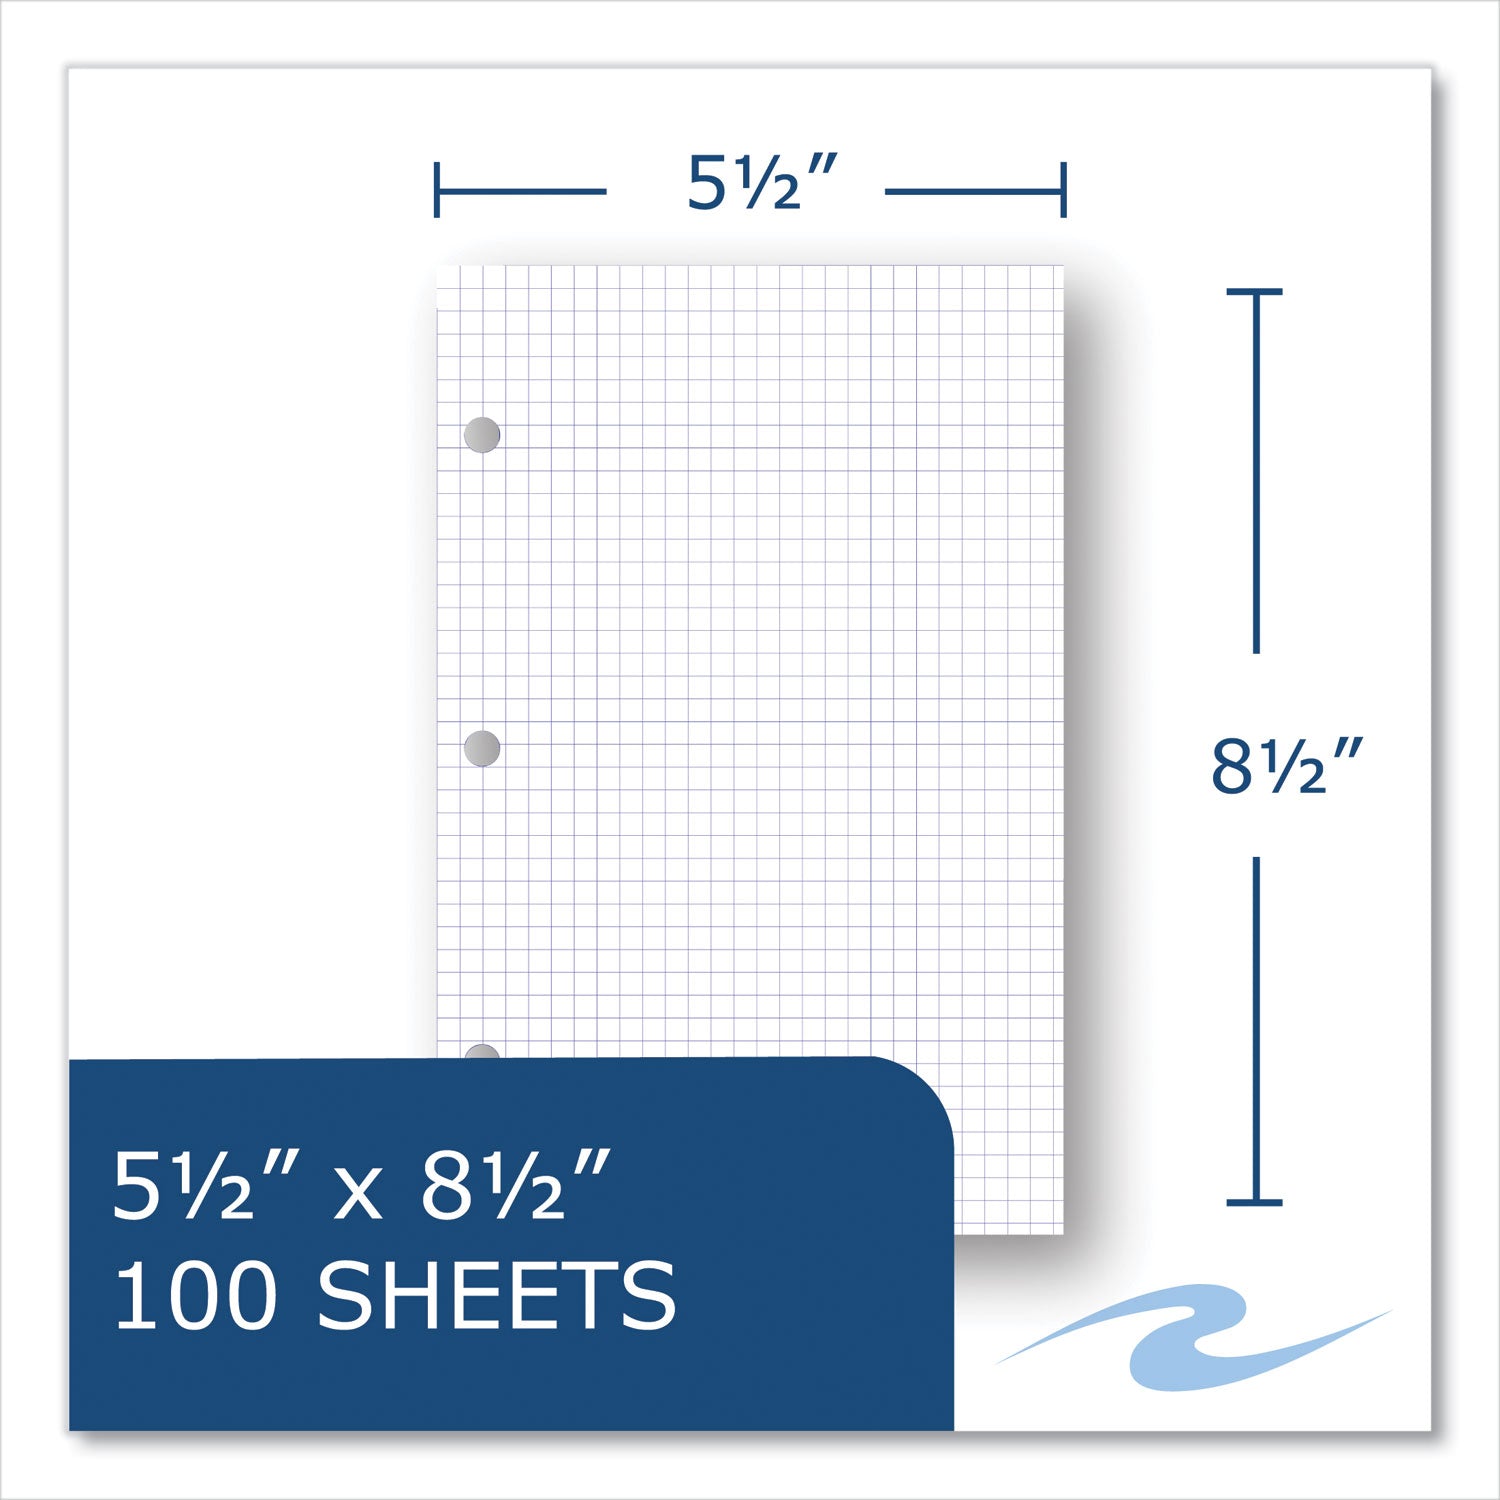 graph-filler-paper-3-hole-quadrille-5-sq-in-100-85-x-55-sheets-48-carton-ships-in-4-6-business-days_roa20815cs - 2